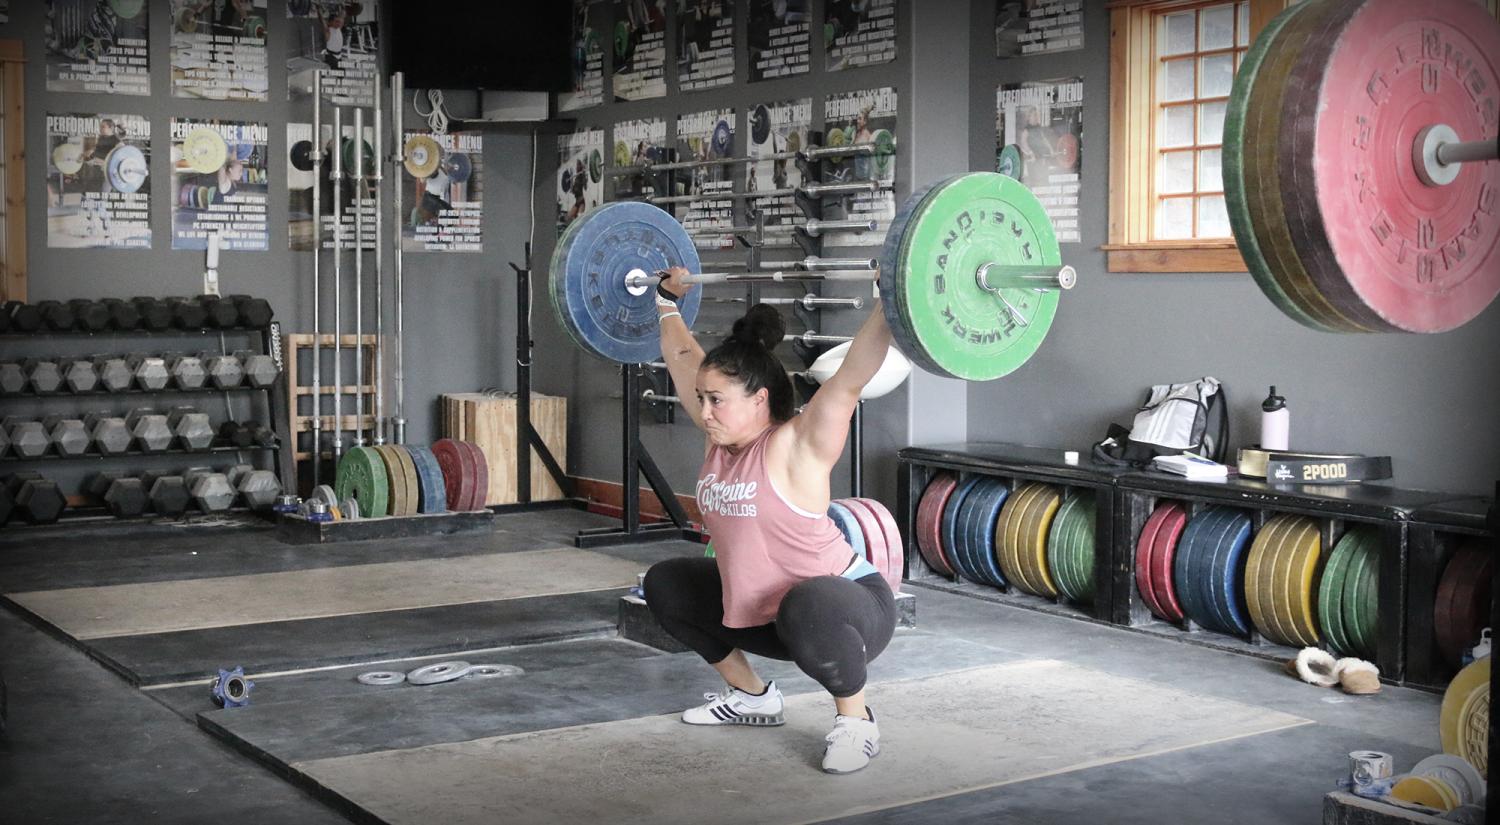 Learn The Olympic Lifts - Snatch